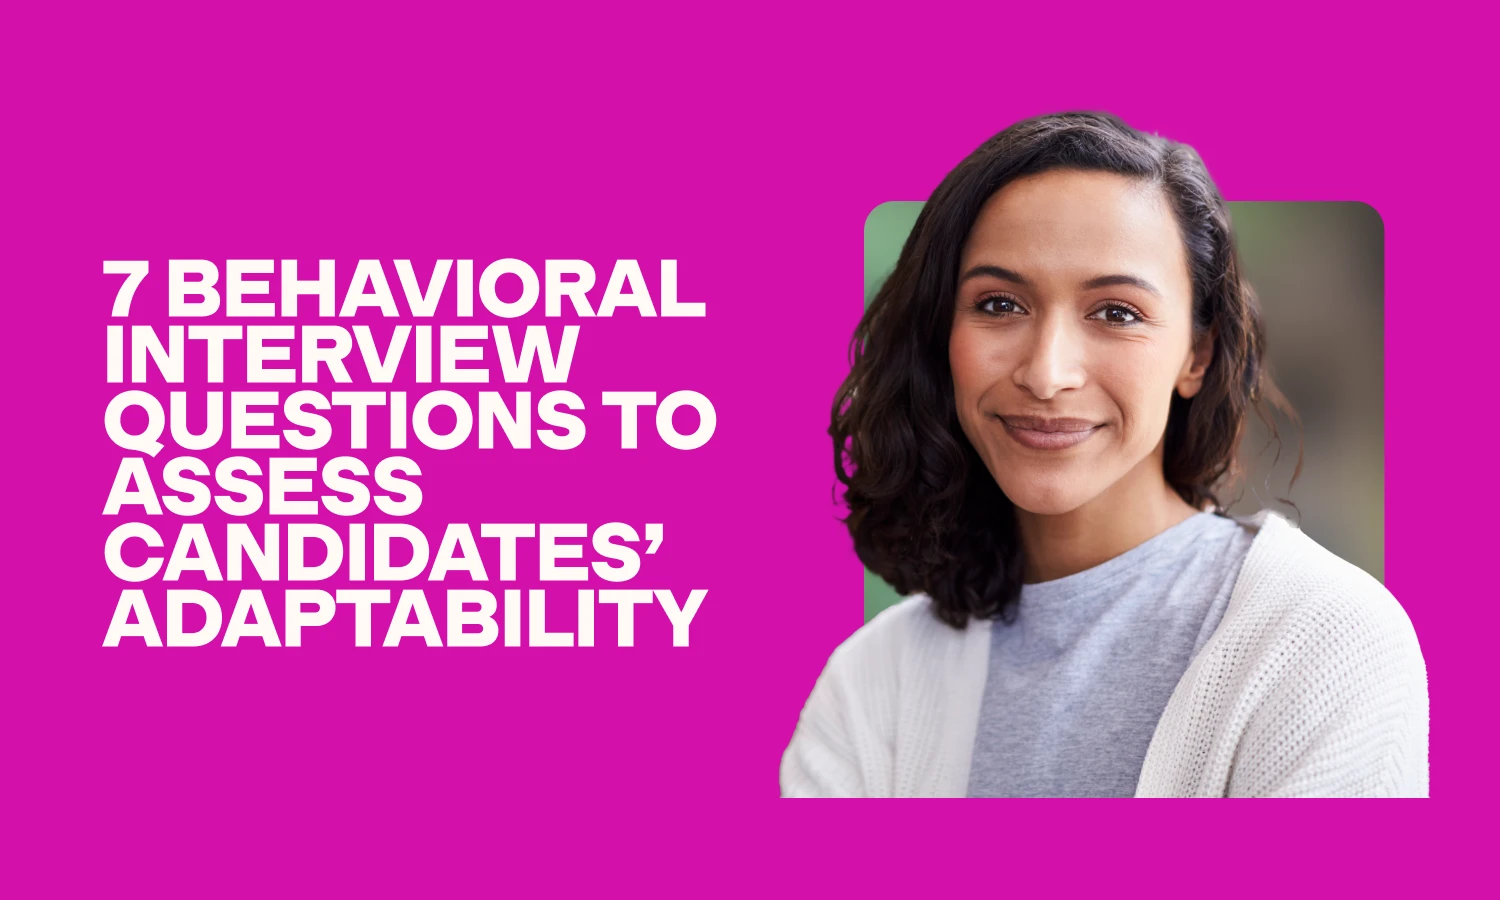 behavioral interview questions to assess candidates’ adaptability